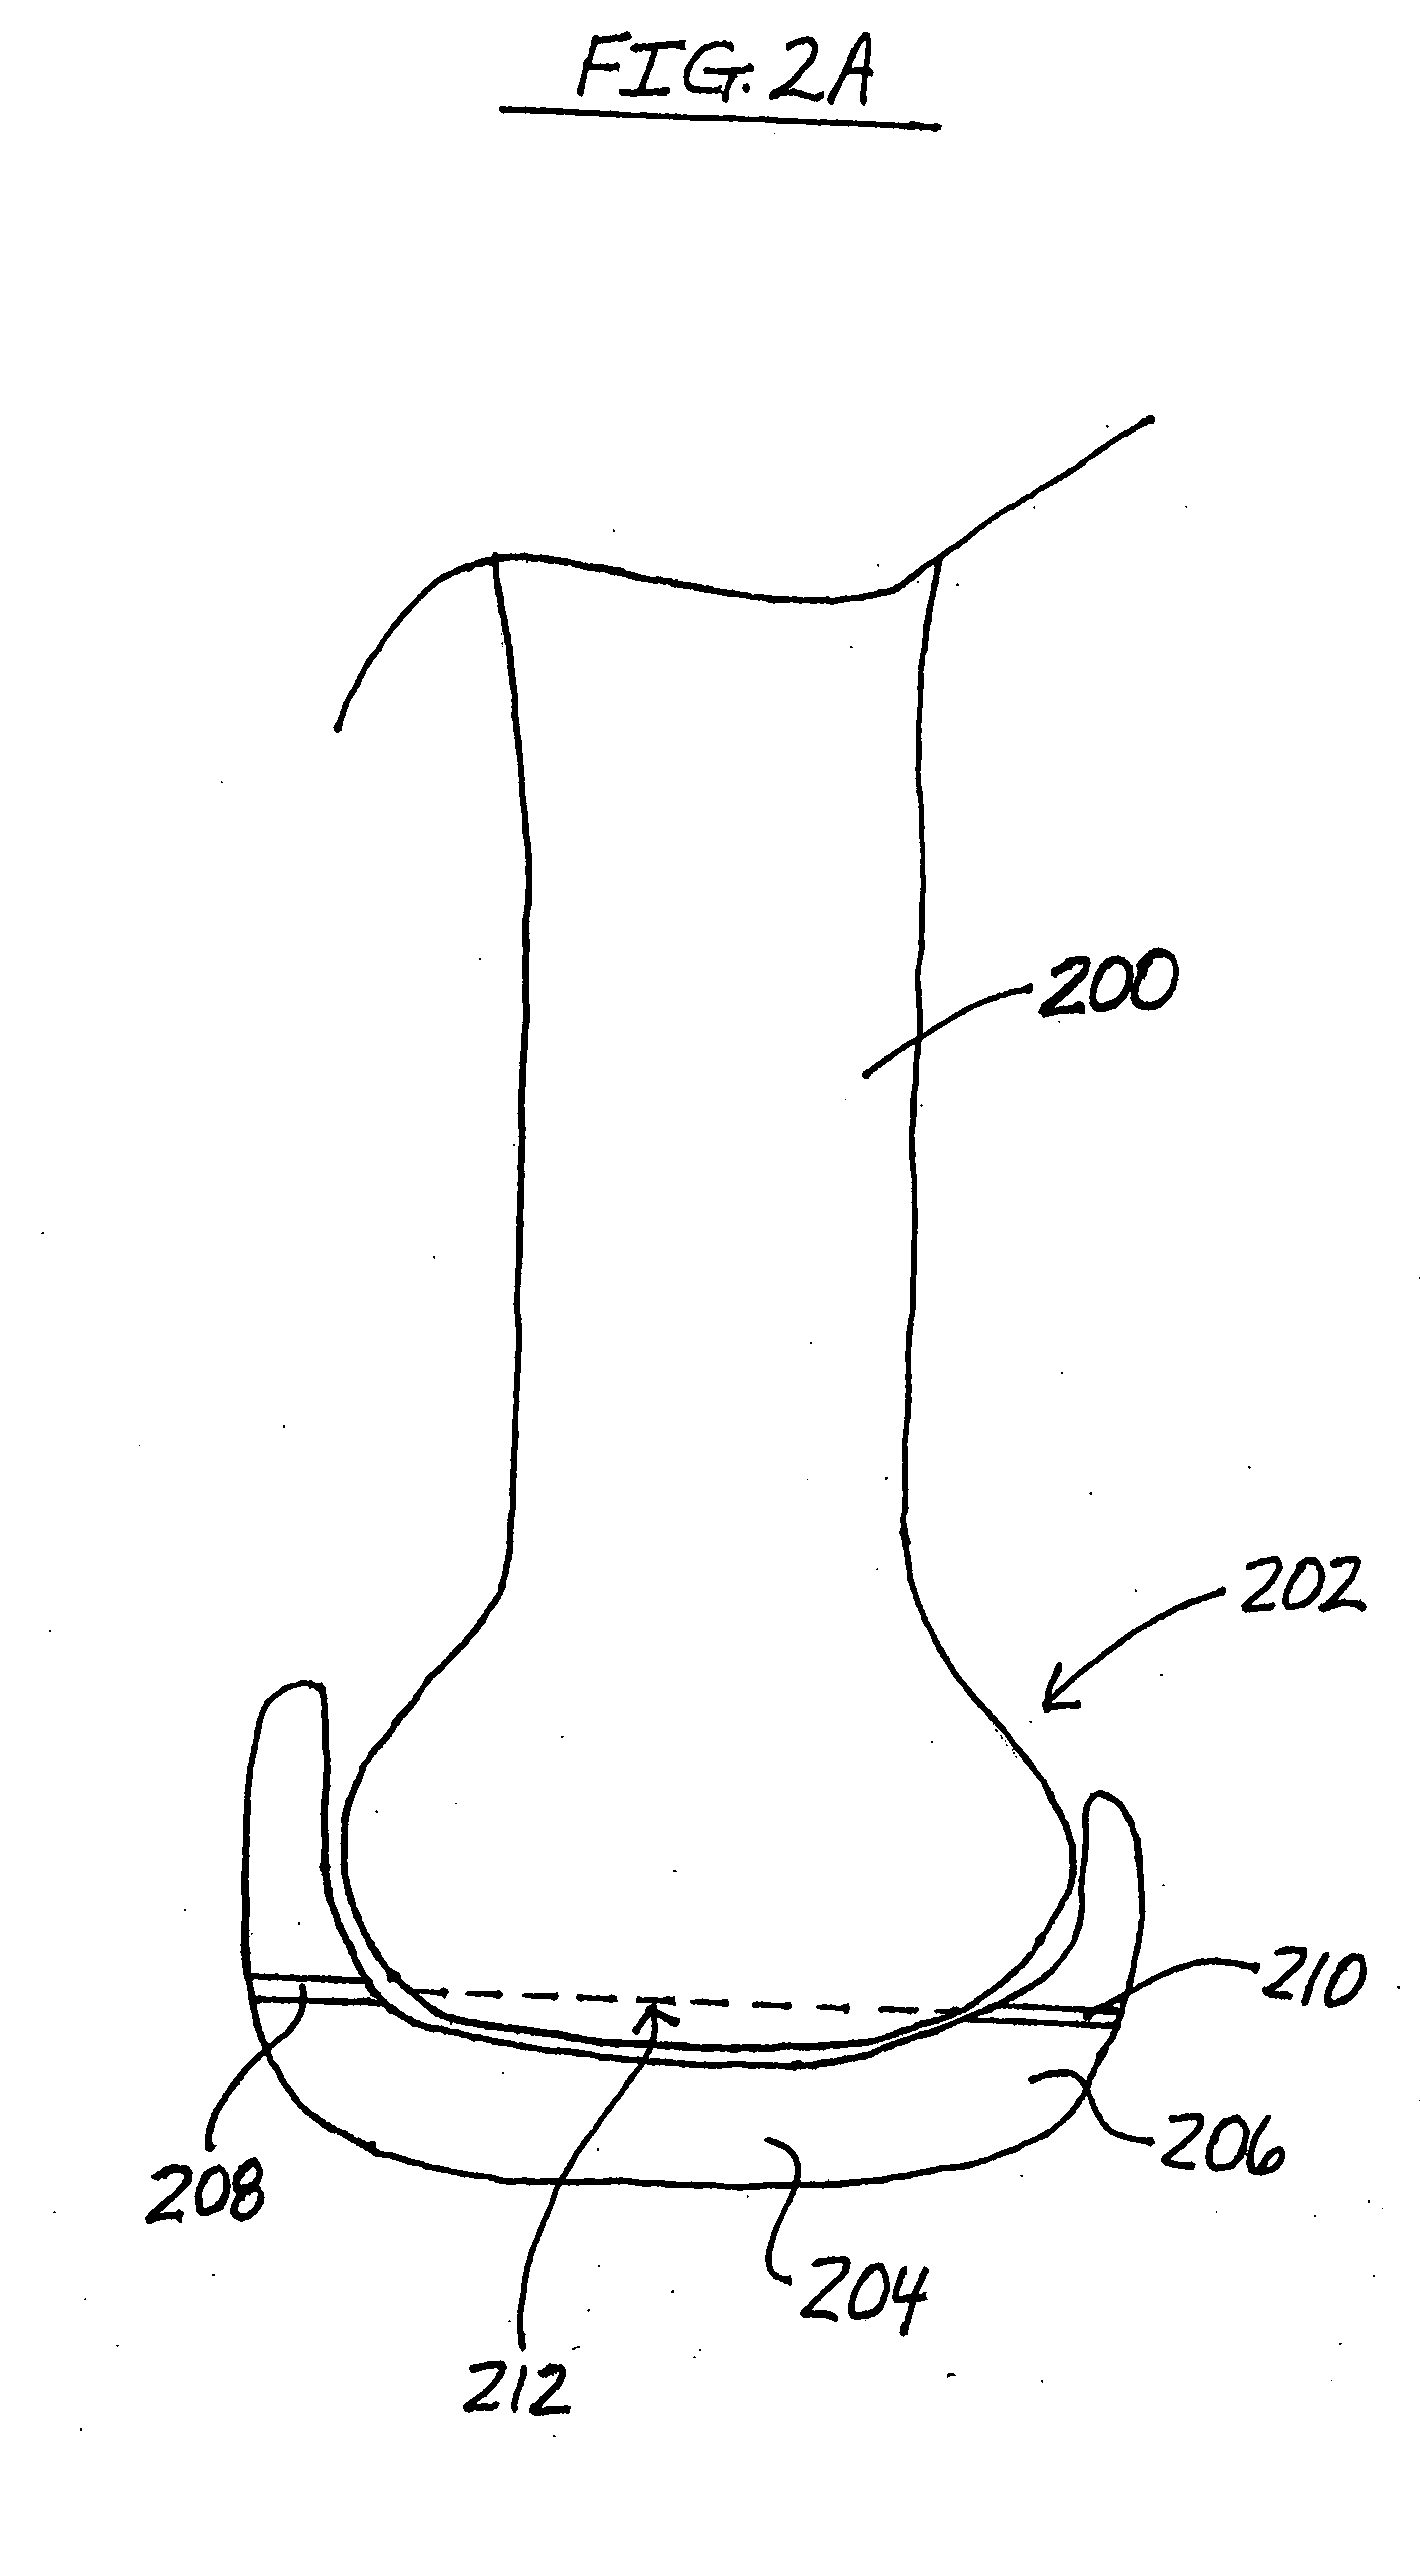 Arthroplasty devices and related methods